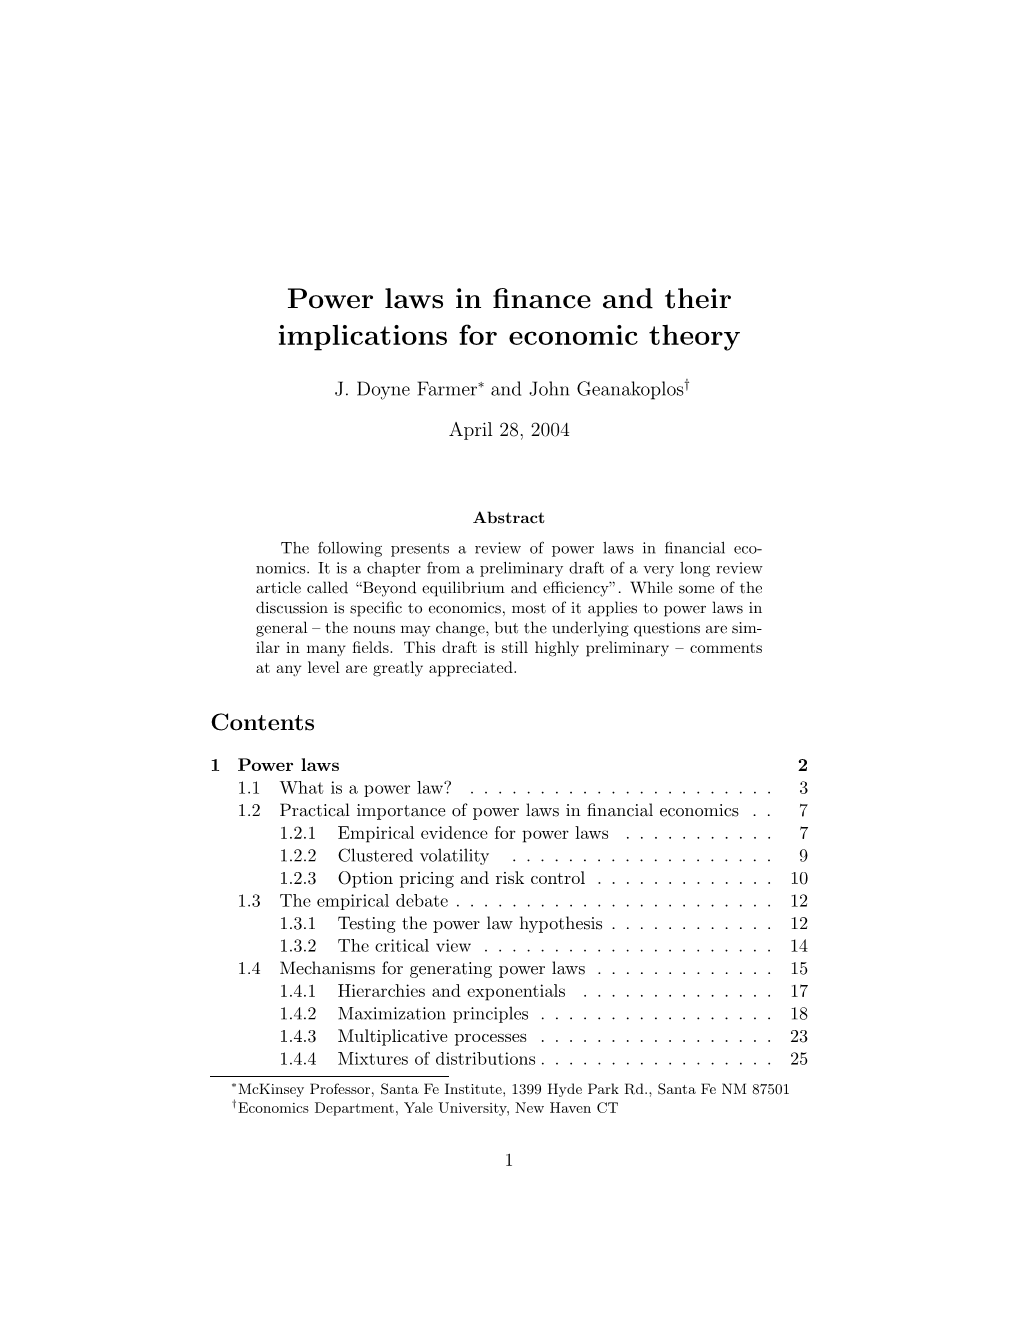 Power Laws in Finance and Their Implications for Economic Theory